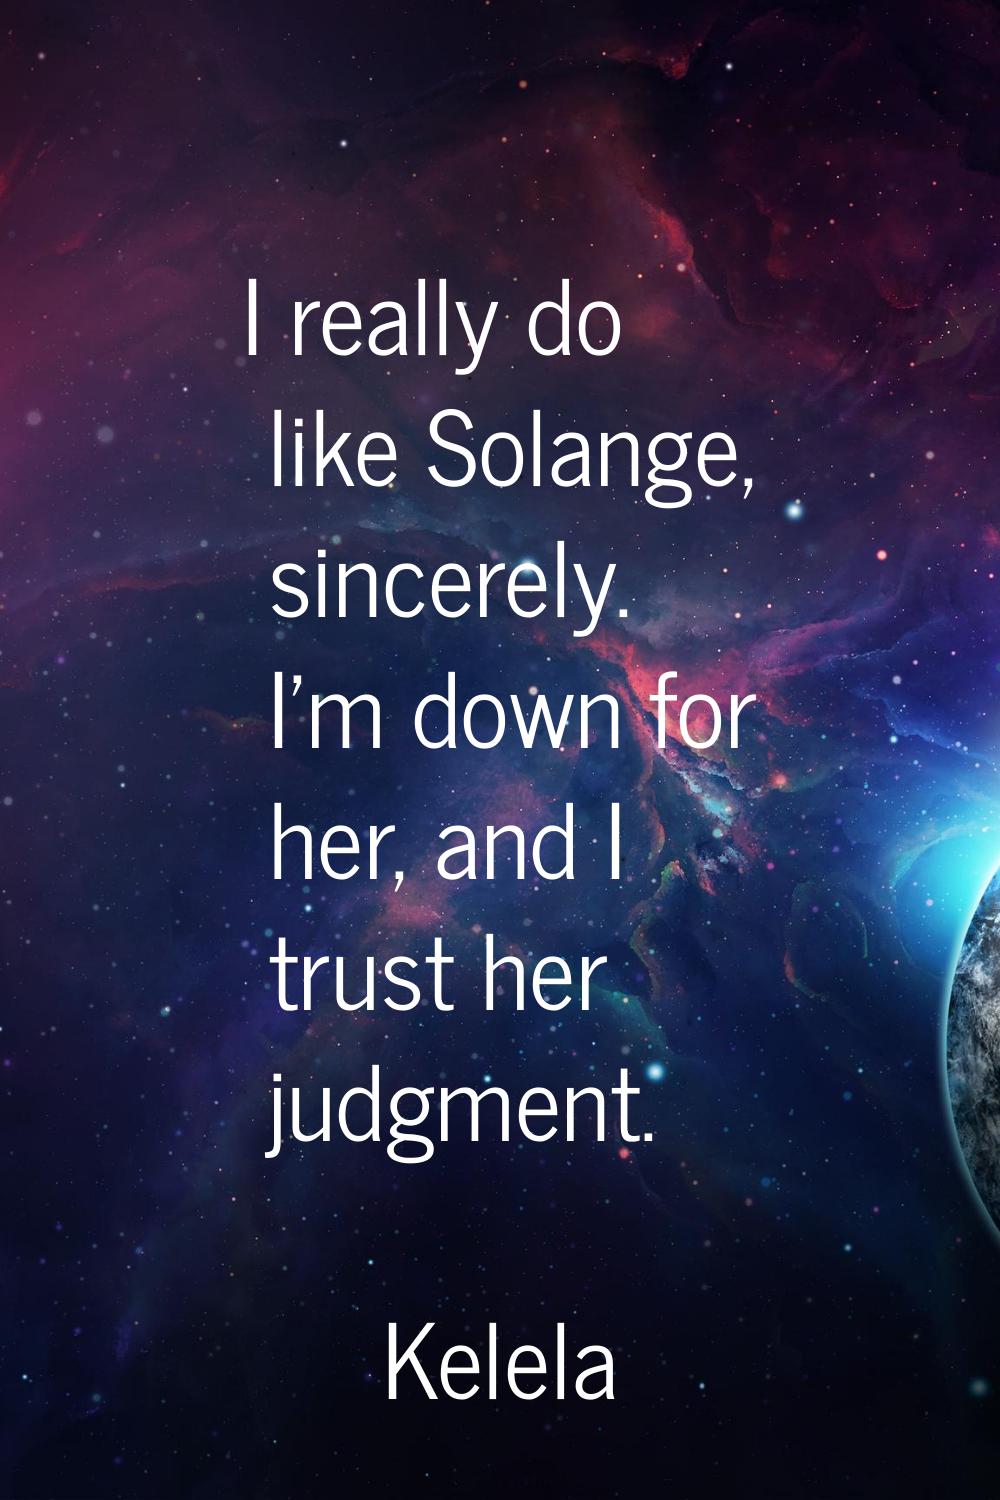 I really do like Solange, sincerely. I'm down for her, and I trust her judgment.